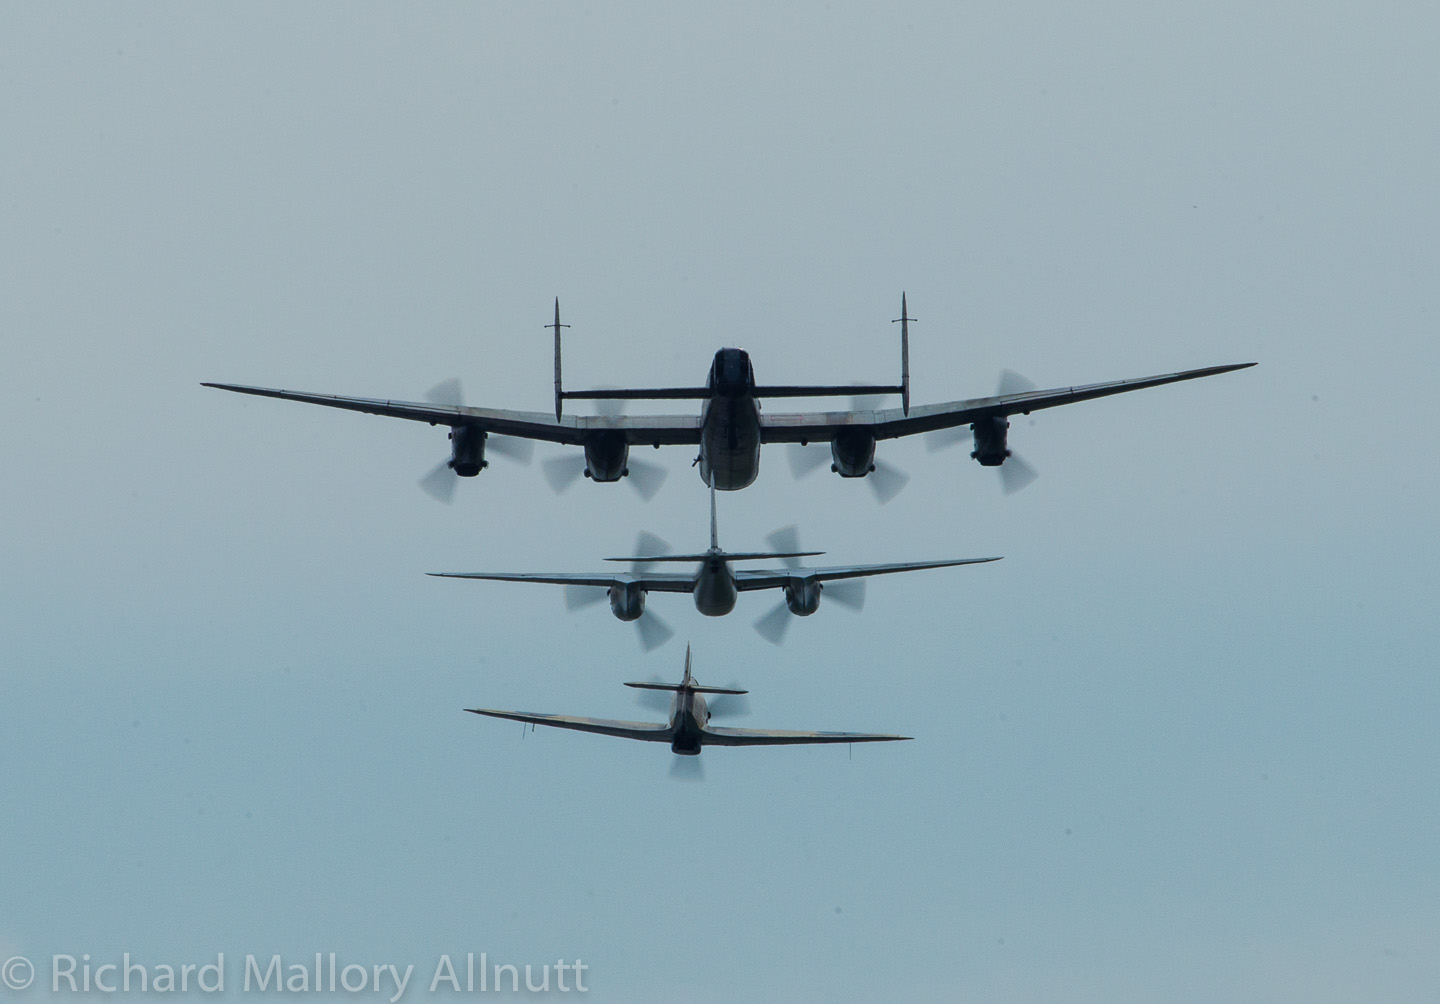 The magnificent sight of the Military Aviation Museum's Mosquito in formation with the Canadian Warplane Heritage Museum's Lancaster and Vintage Wings of Canada's Hurricane... With your help we shall see a similar sight at Oshkosh this summer. (photo by Richard Mallory Allnutt)